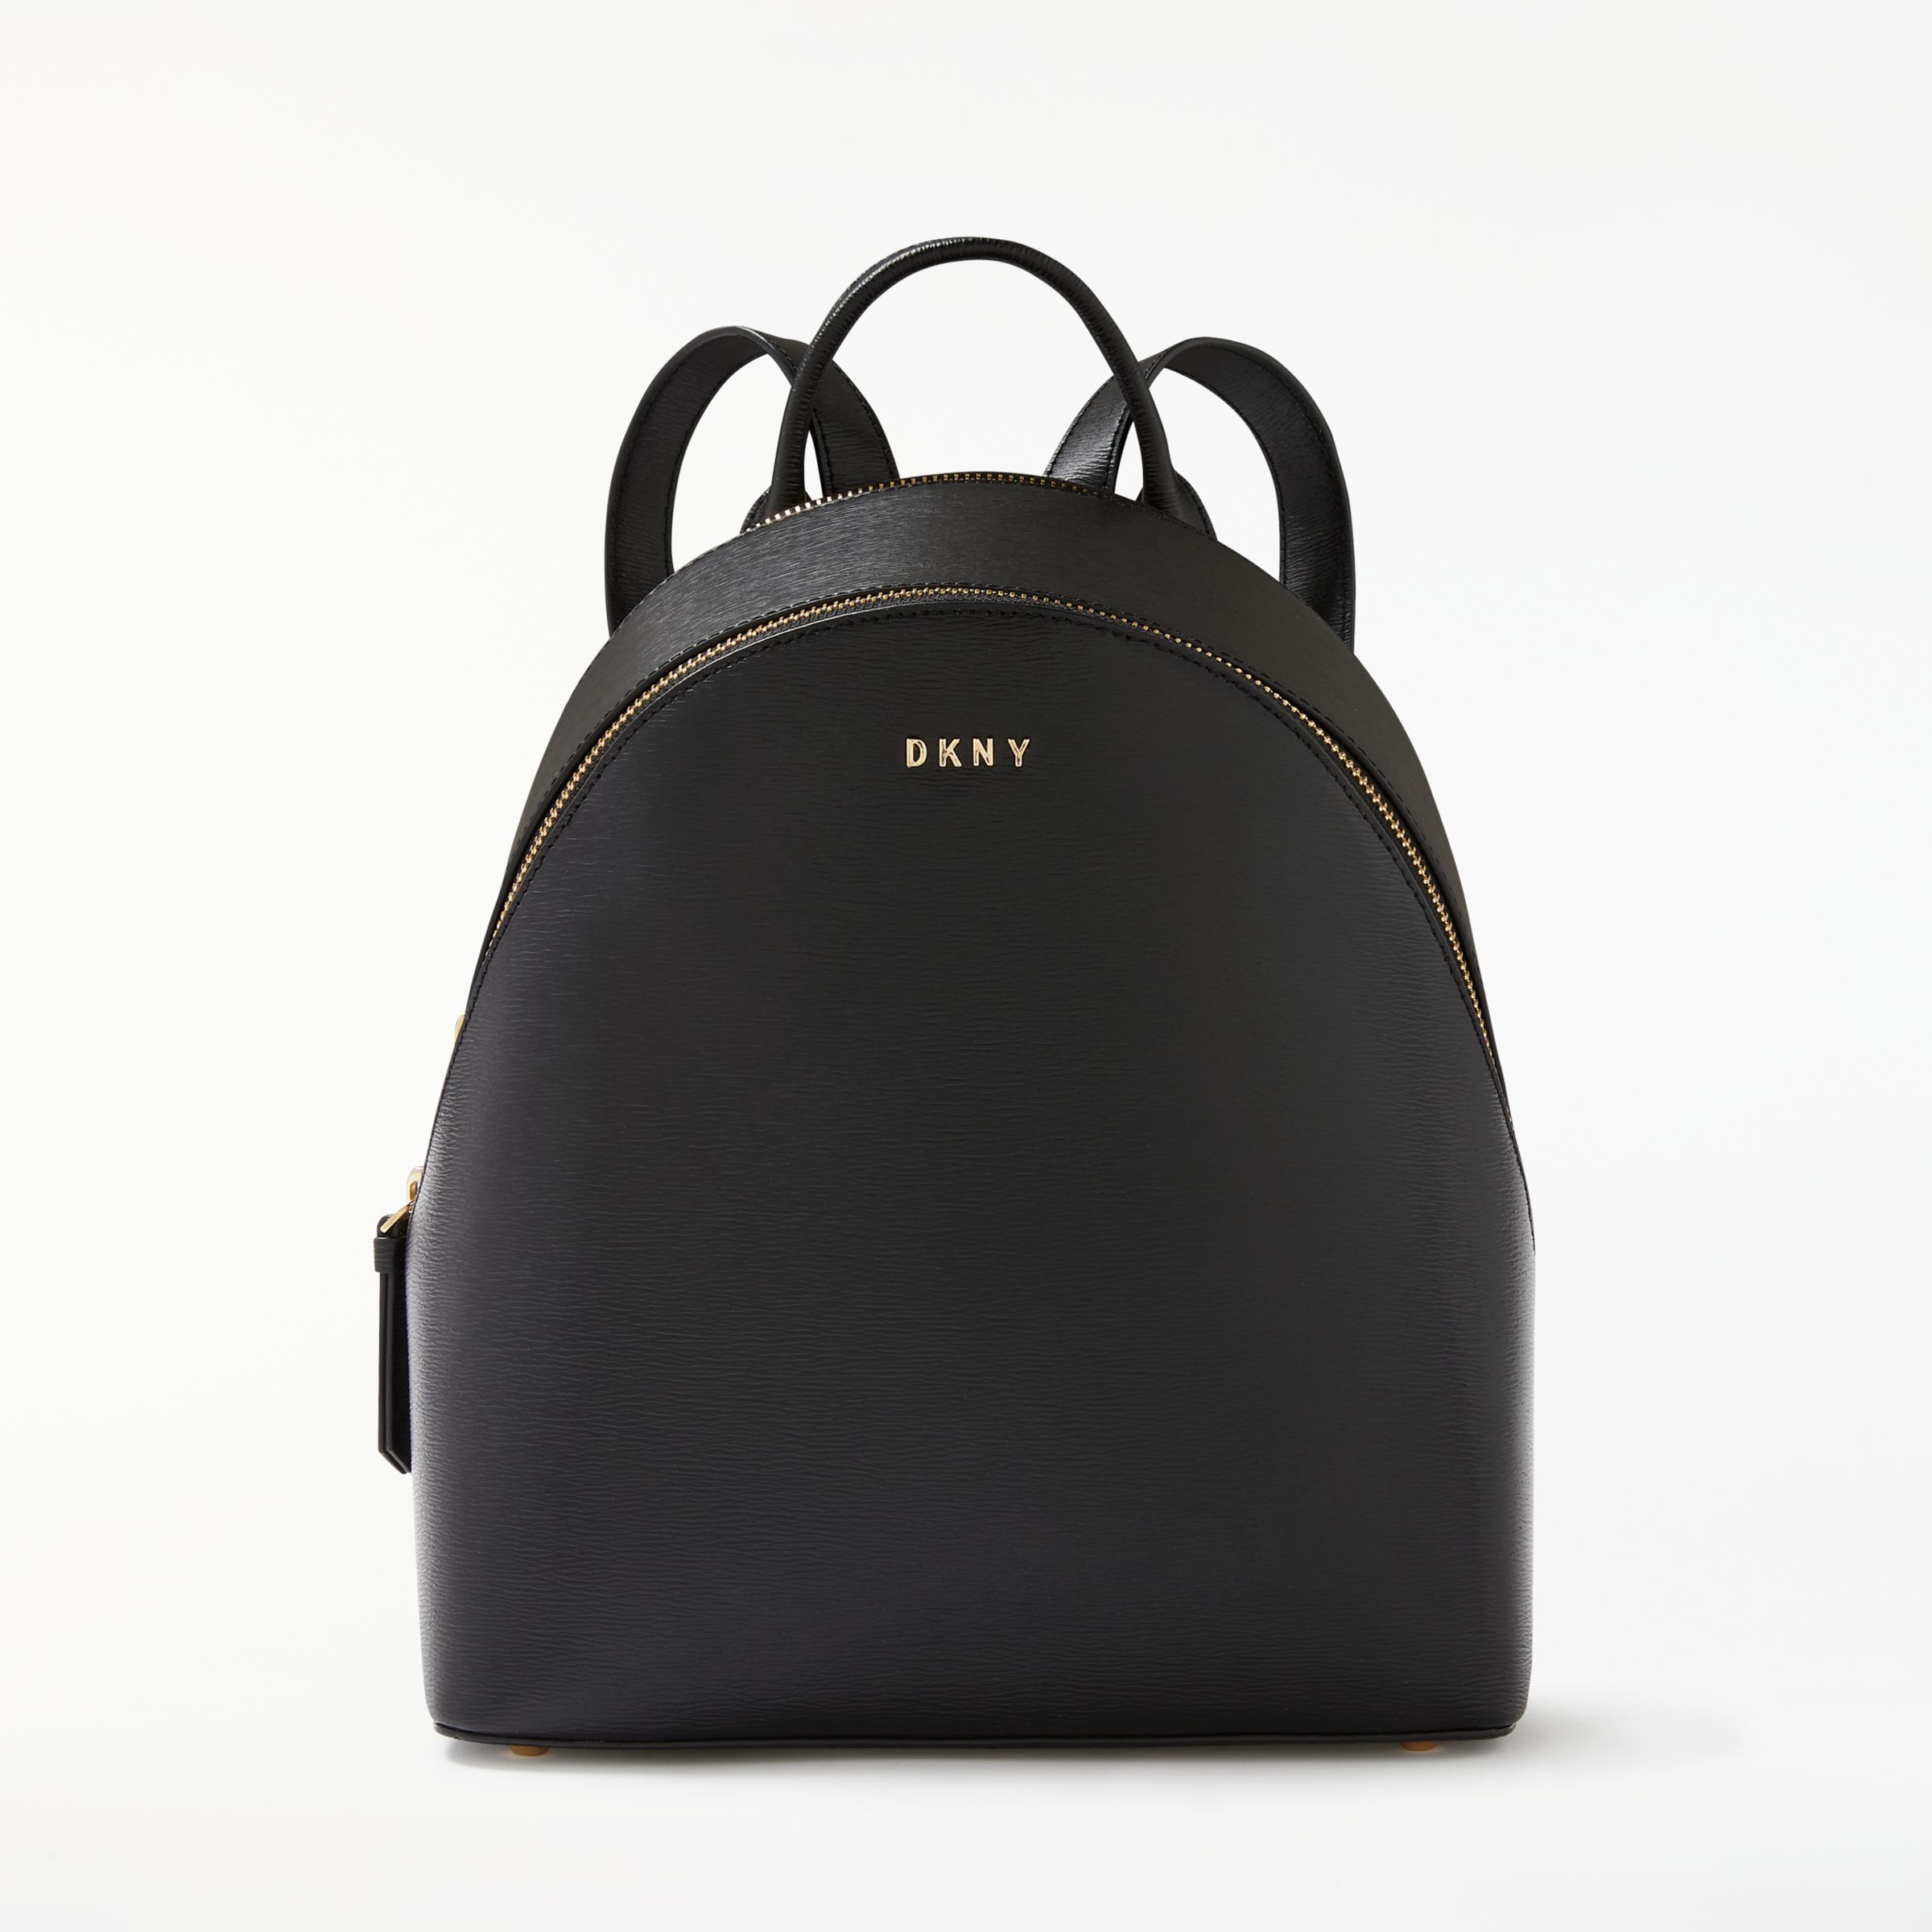 DKNY Sutton Textured Leather Medium Backpack, Black at John Lewis & Partners